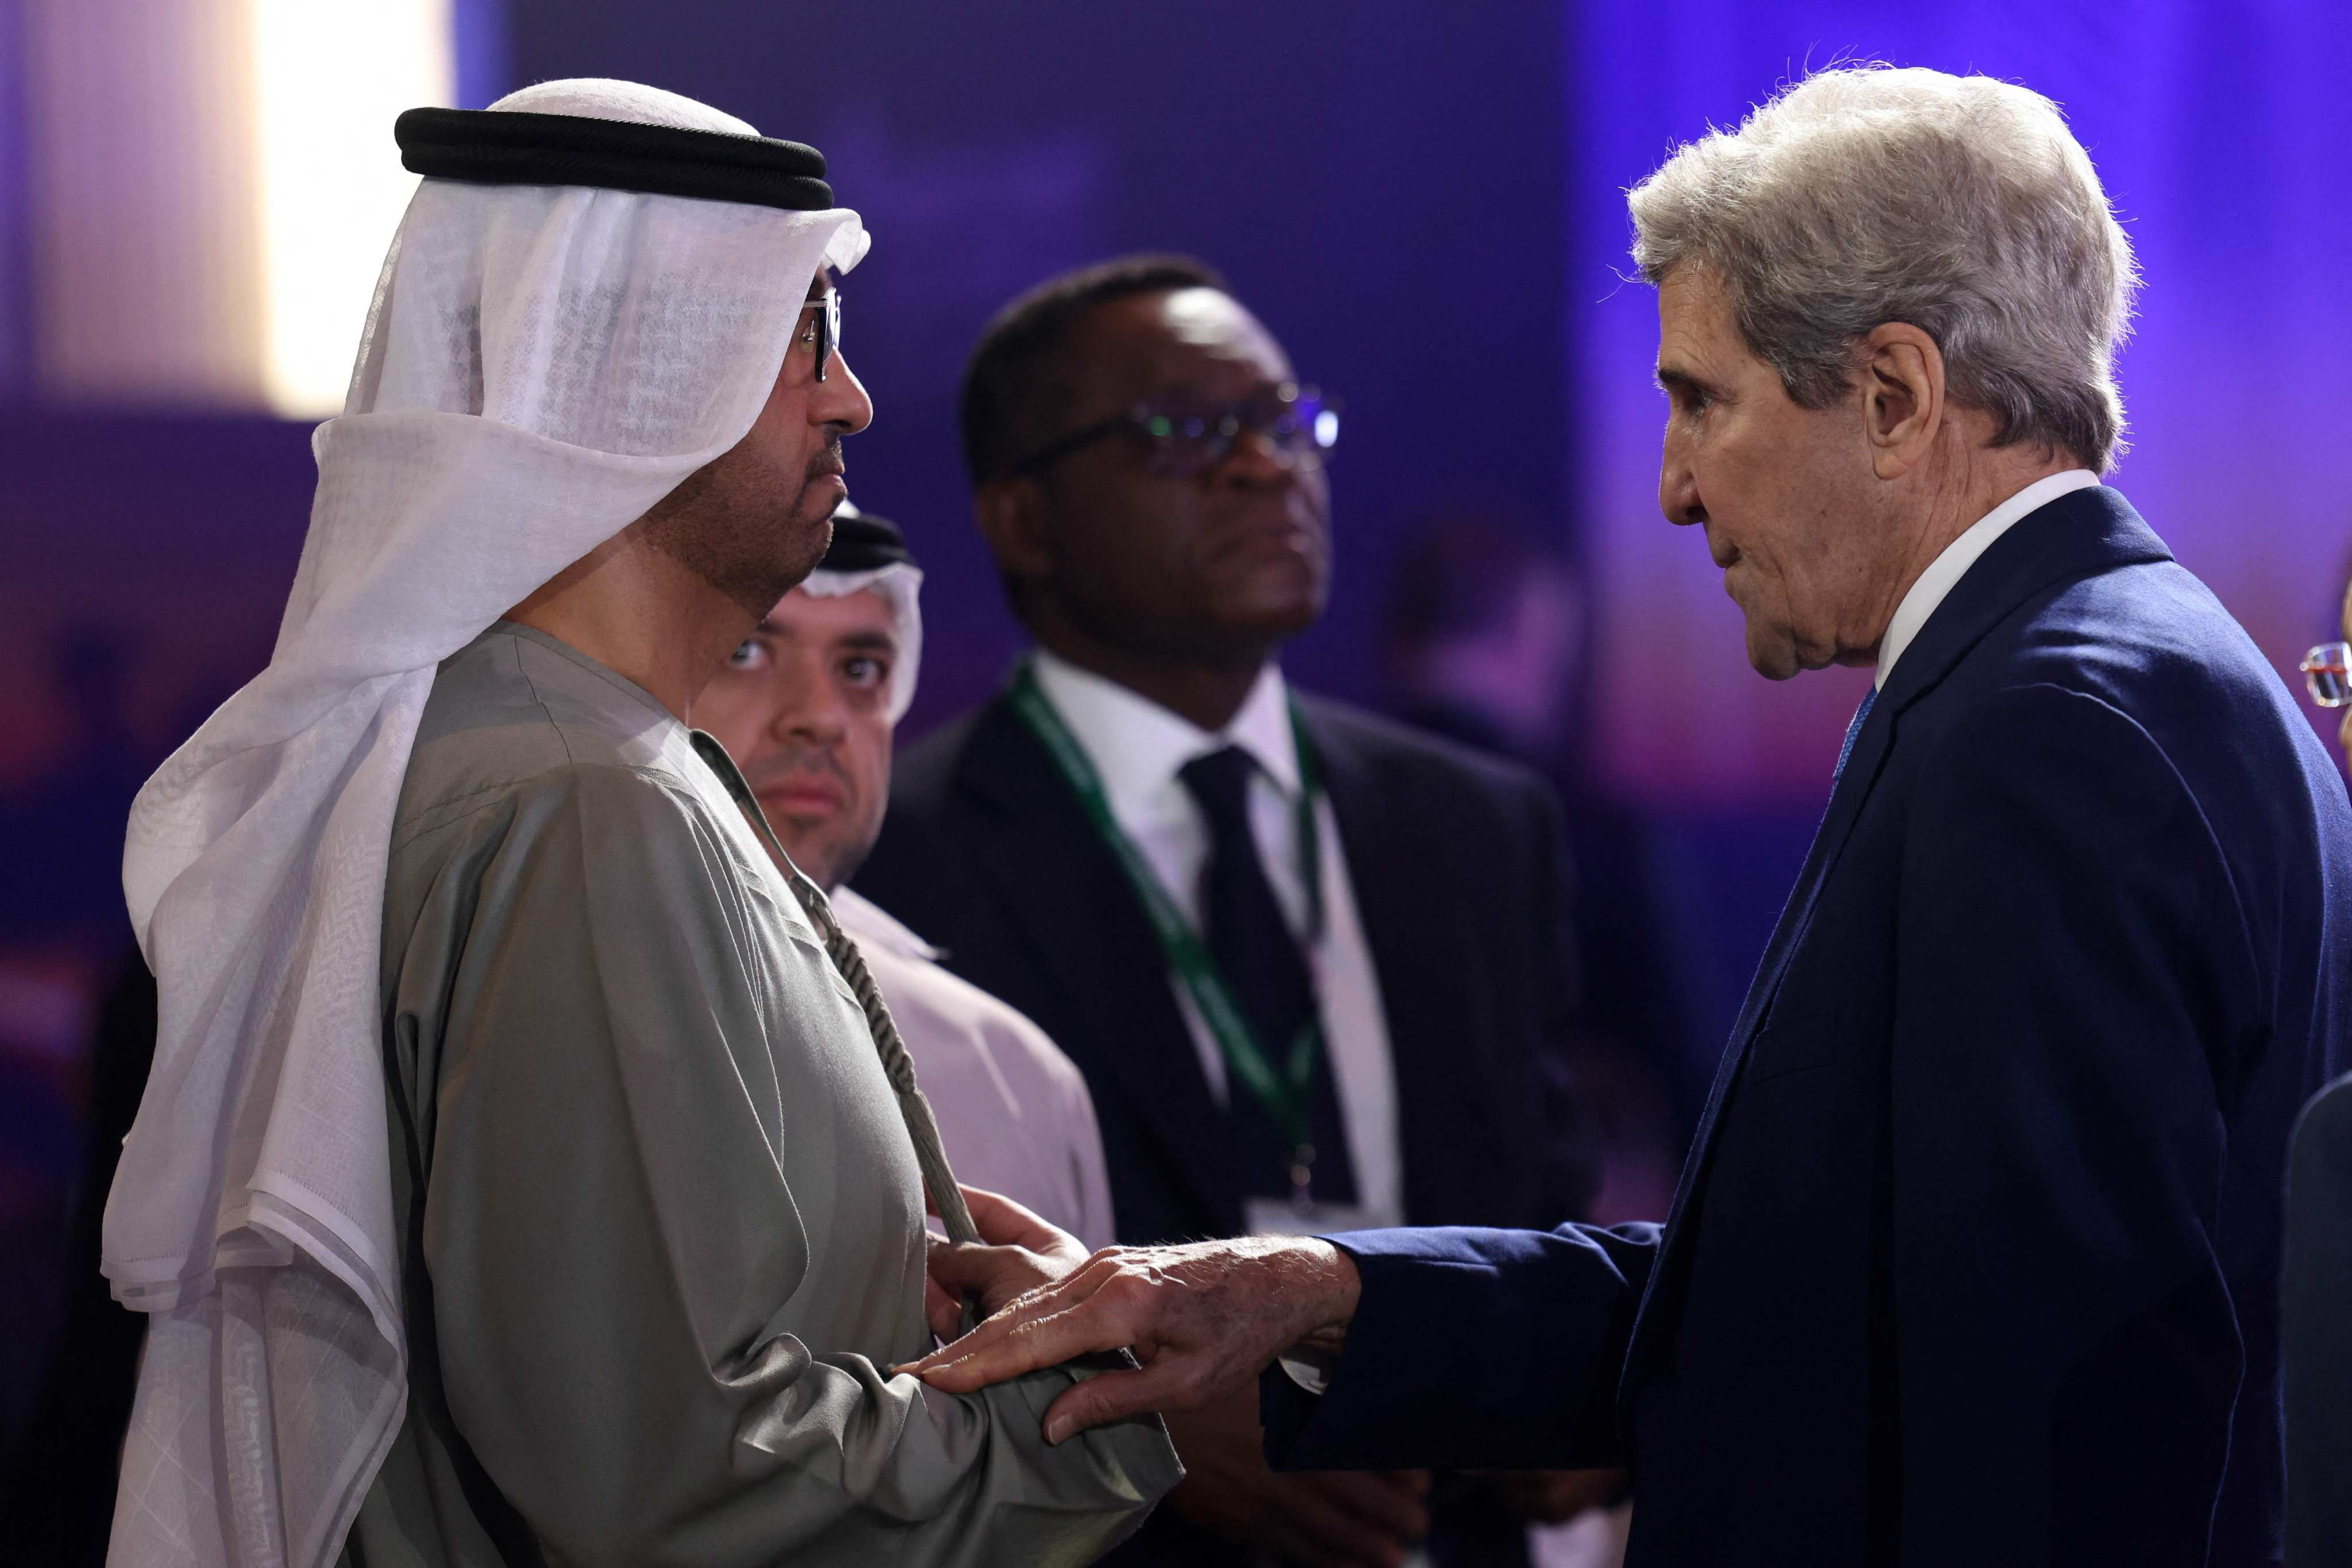 The UAE Minister of State and CEO of the Abu Dhabi National Oil Company, Sultan Ahmed al-Jaber, speaks to the US Presidential Envoy for Climate John Kerry, at the opening session of the Atlantic Council Global Energy Forum, in Abu Dhabi on January 14. Al-Jaber is president of this year’s COP28 climate talks. Photo: AFP